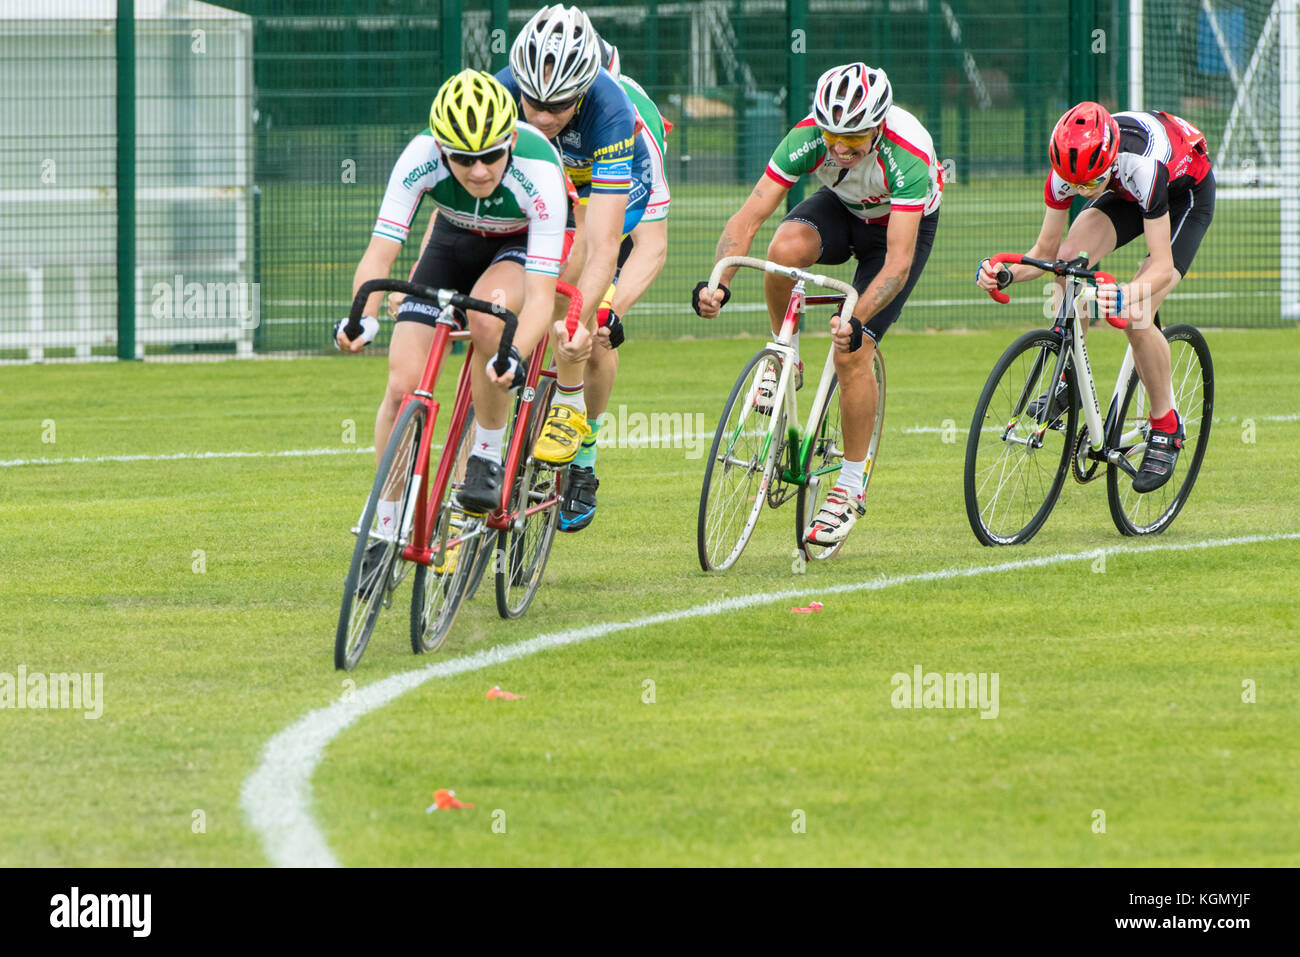 grass track cycling